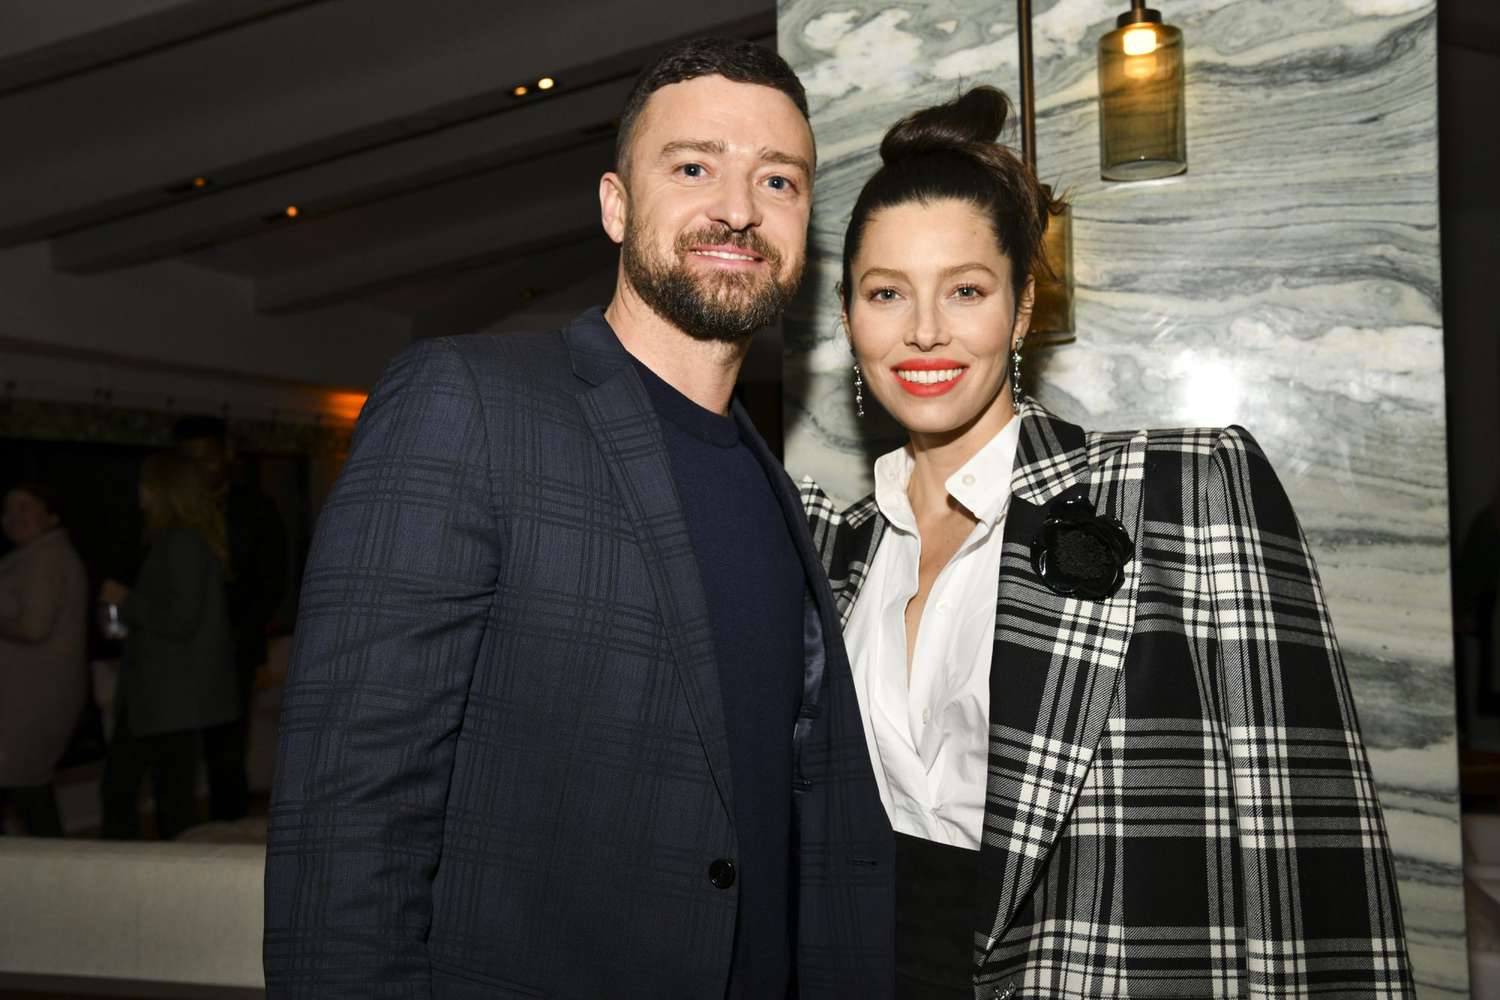 Justin Timberlake and Jessica Biel at the premiere of USA Network's "The Sinner" Season 3 after-party